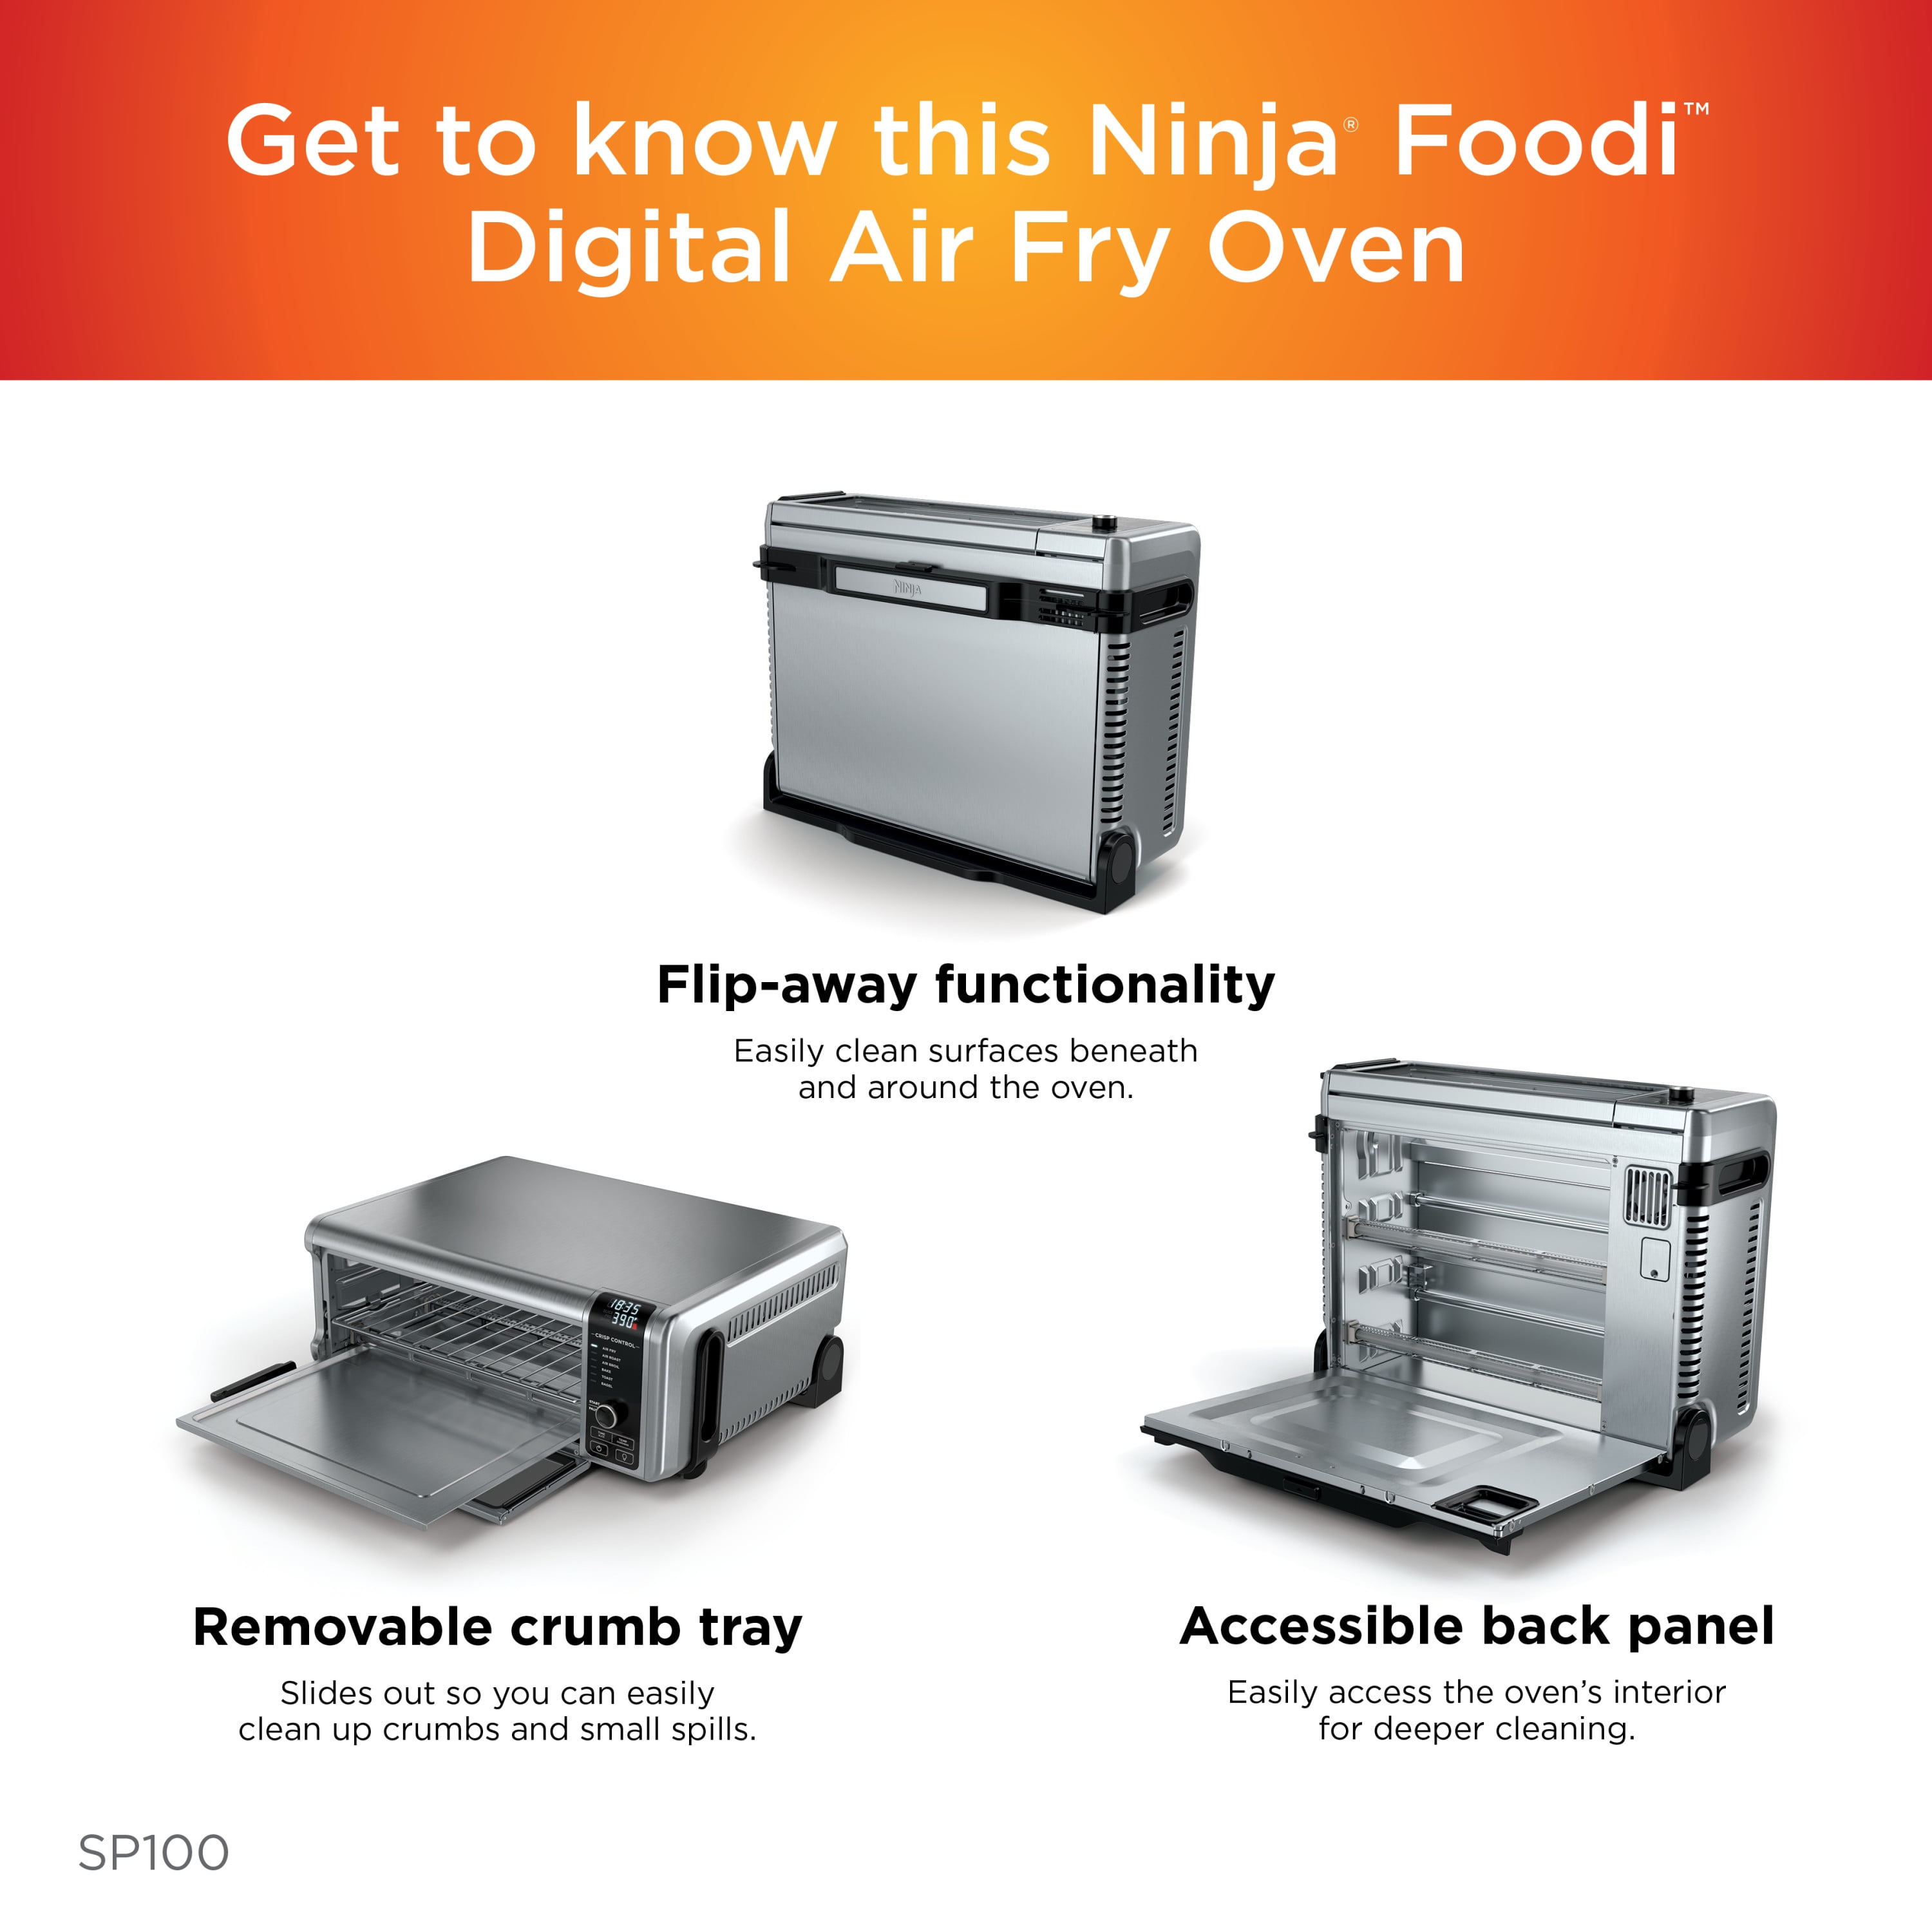 Sealed New! The Ninja Foodi Digital Air Fry Oven, Convection Oven, Toaster  SP100 622356558228